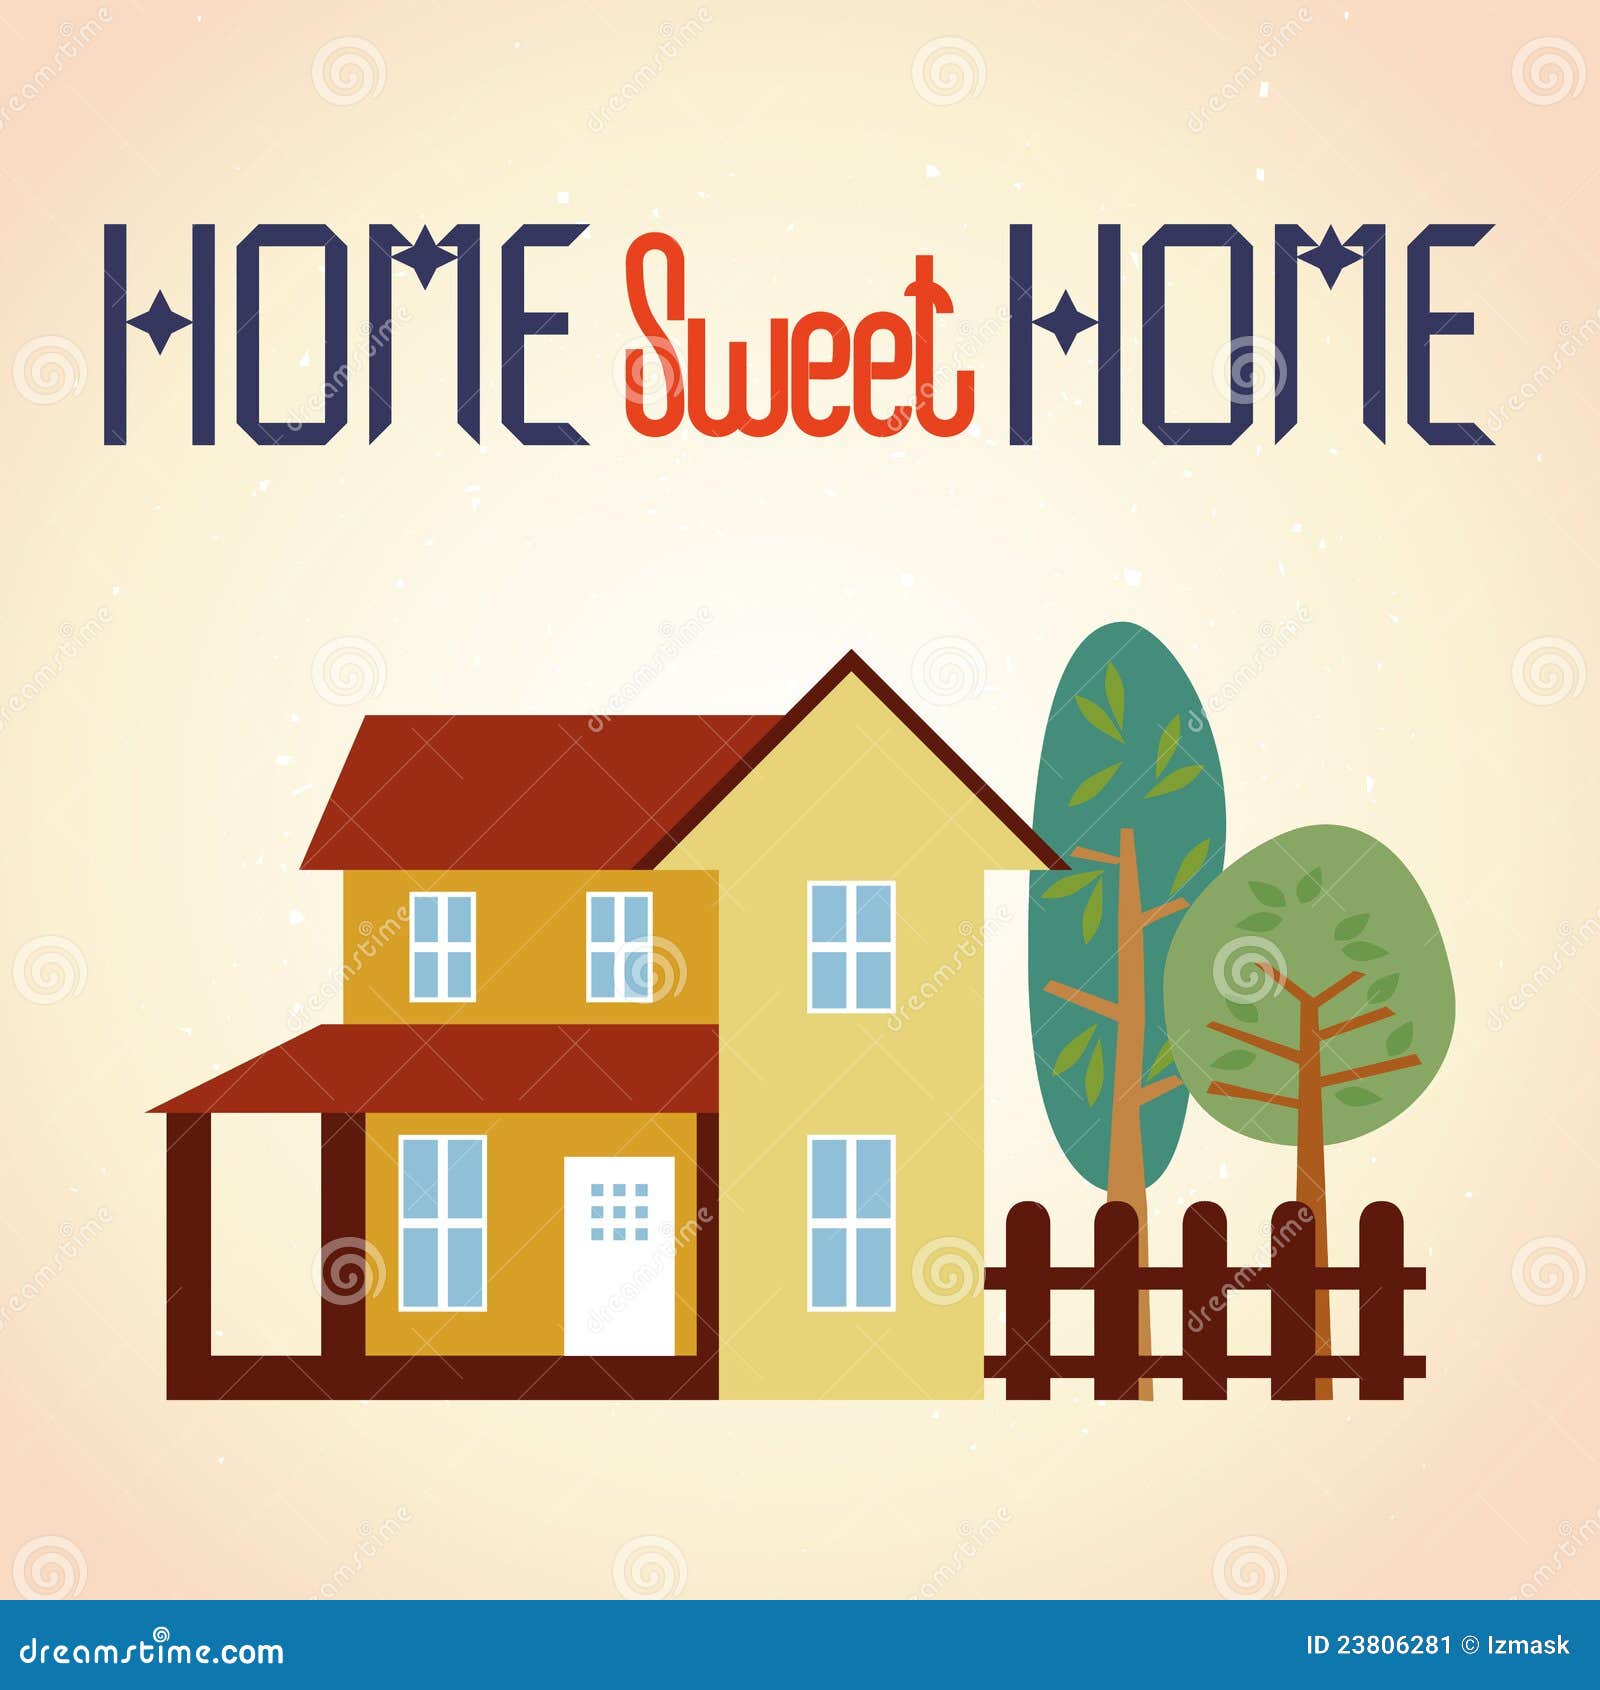 clipart home sweet home - photo #40